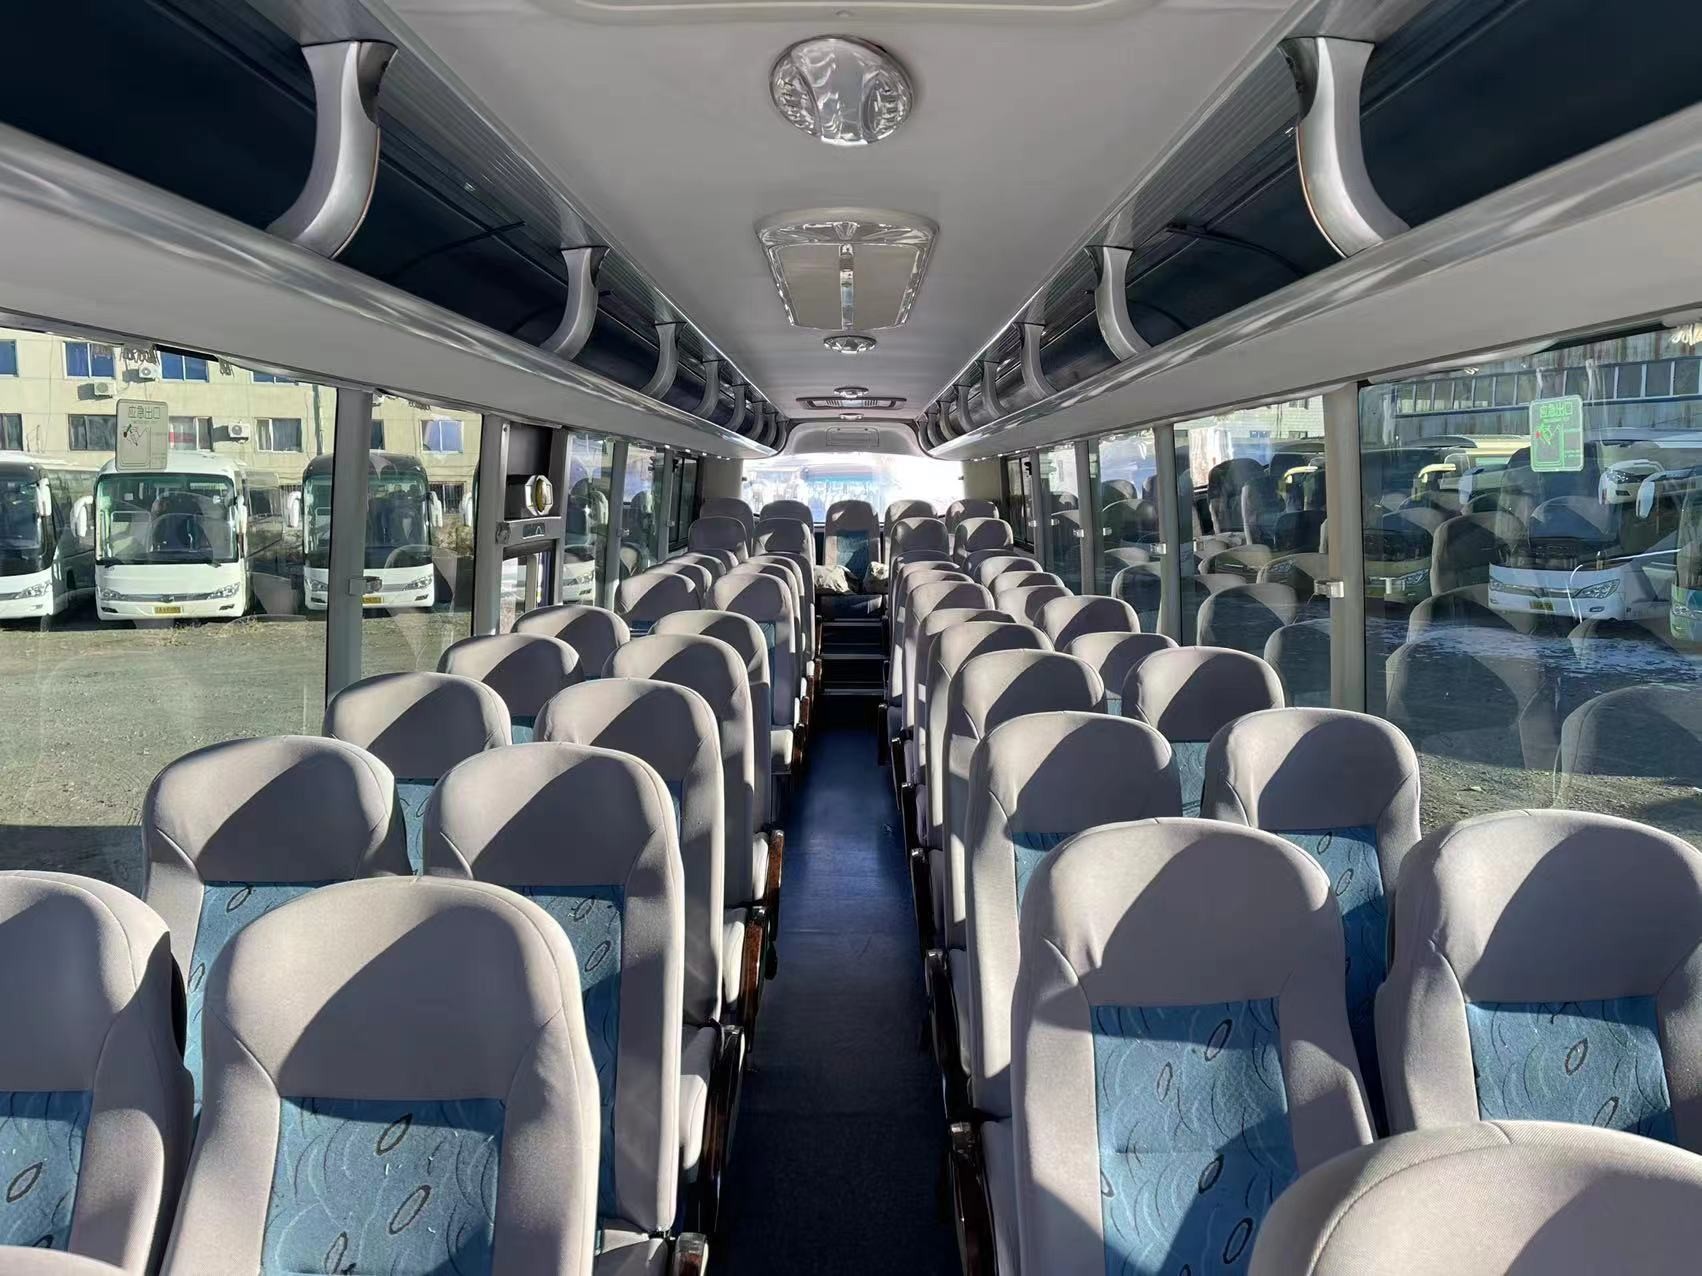 Used Luxury Buses 51seats Coach Two Doors Left Hand Drive Yutong Brand Weichai Rear Engine